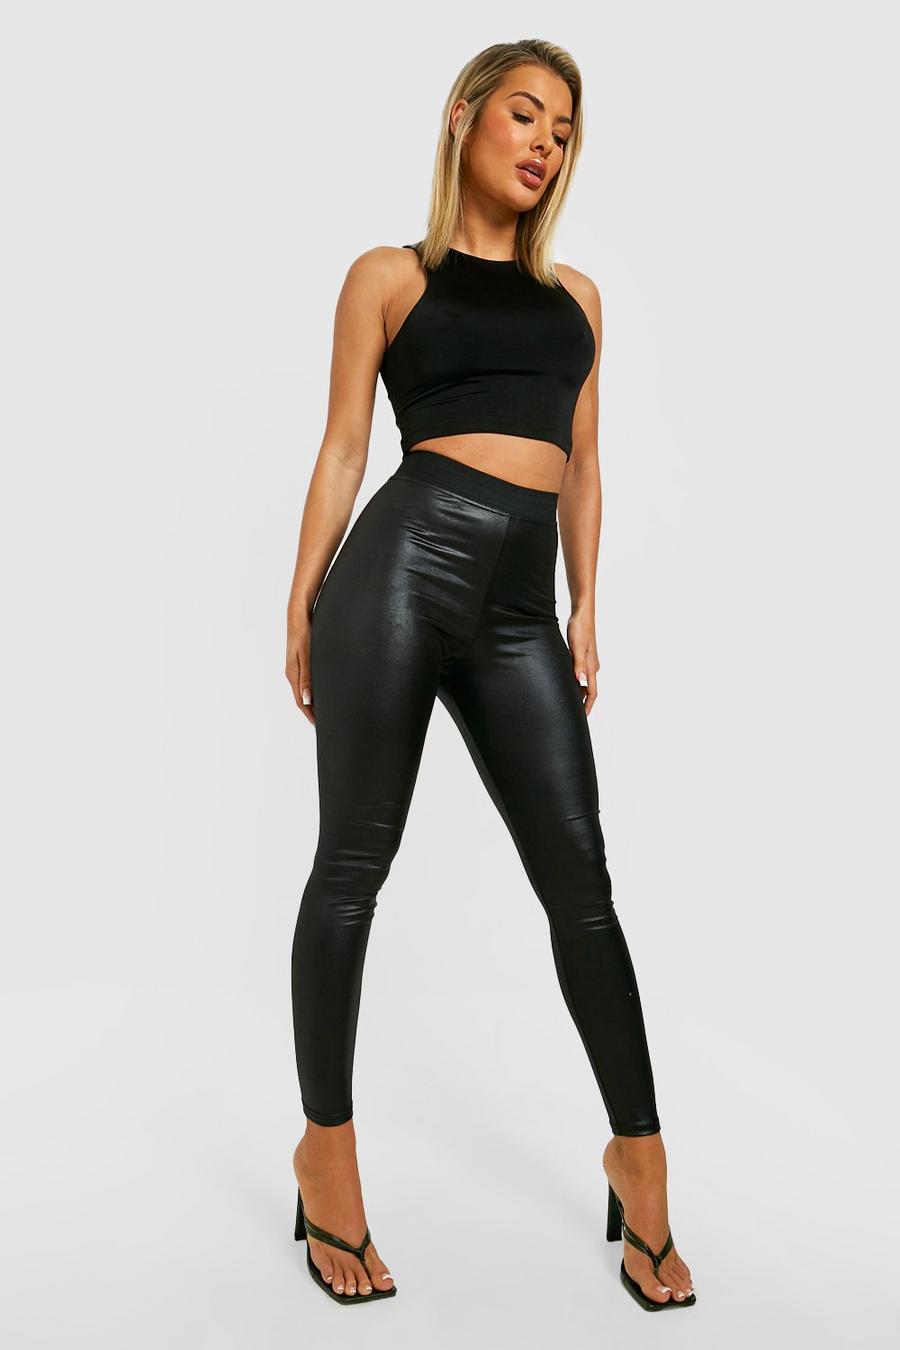 Black Cinched High Waisted Wet Look Leggings image number 1